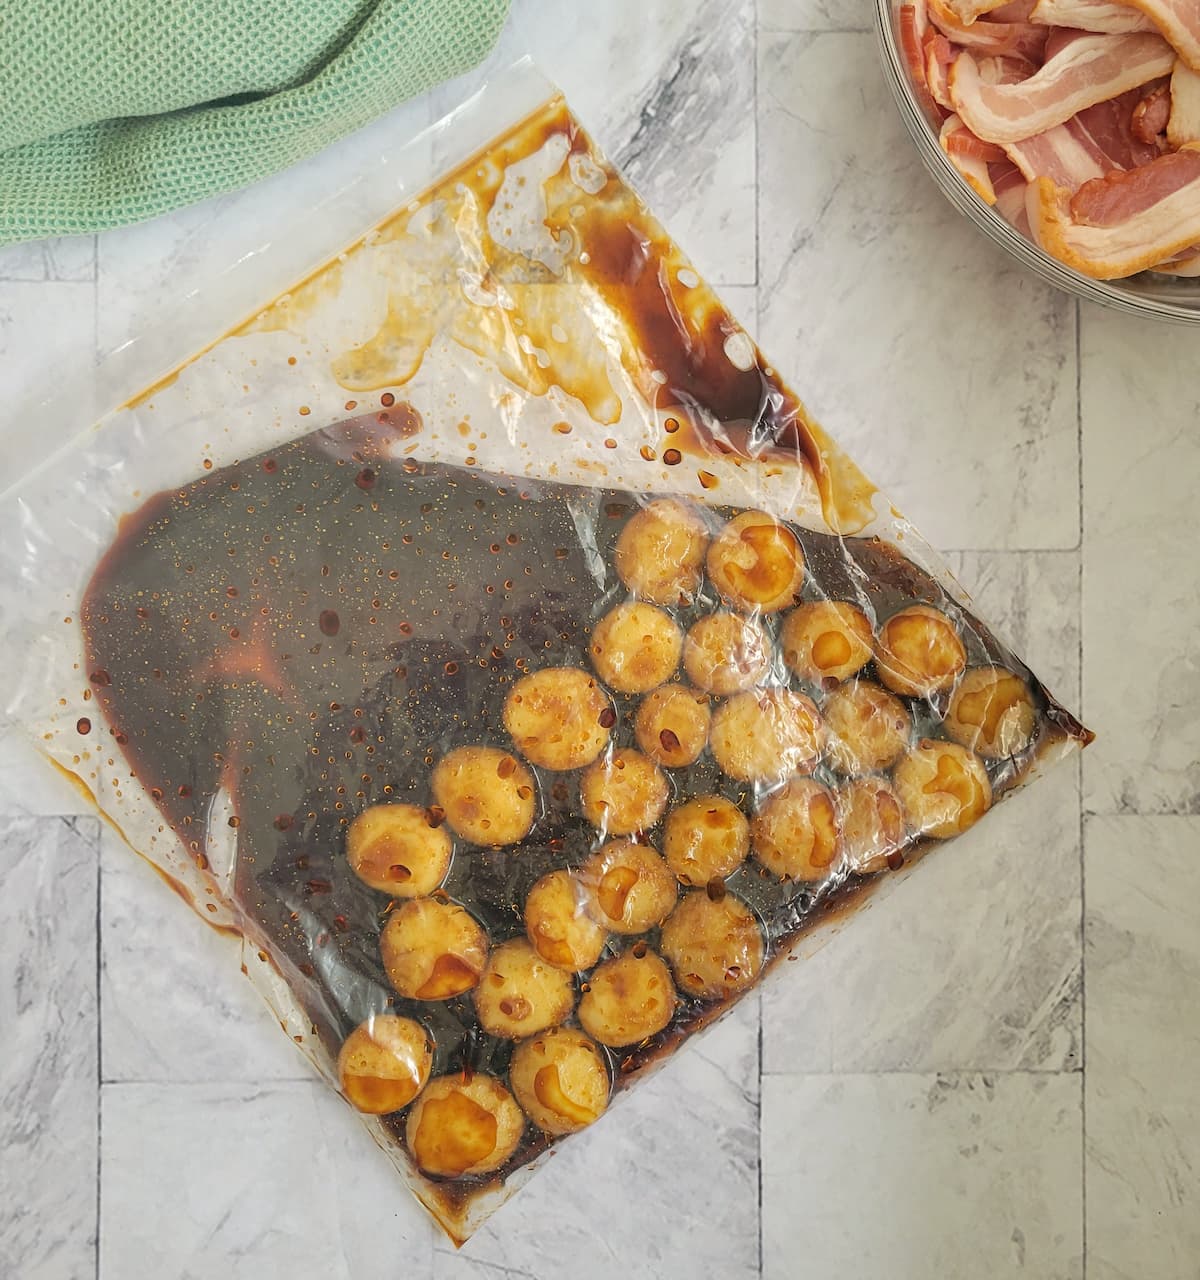 ziploc bag of water chestnuts marinating in soy sauce